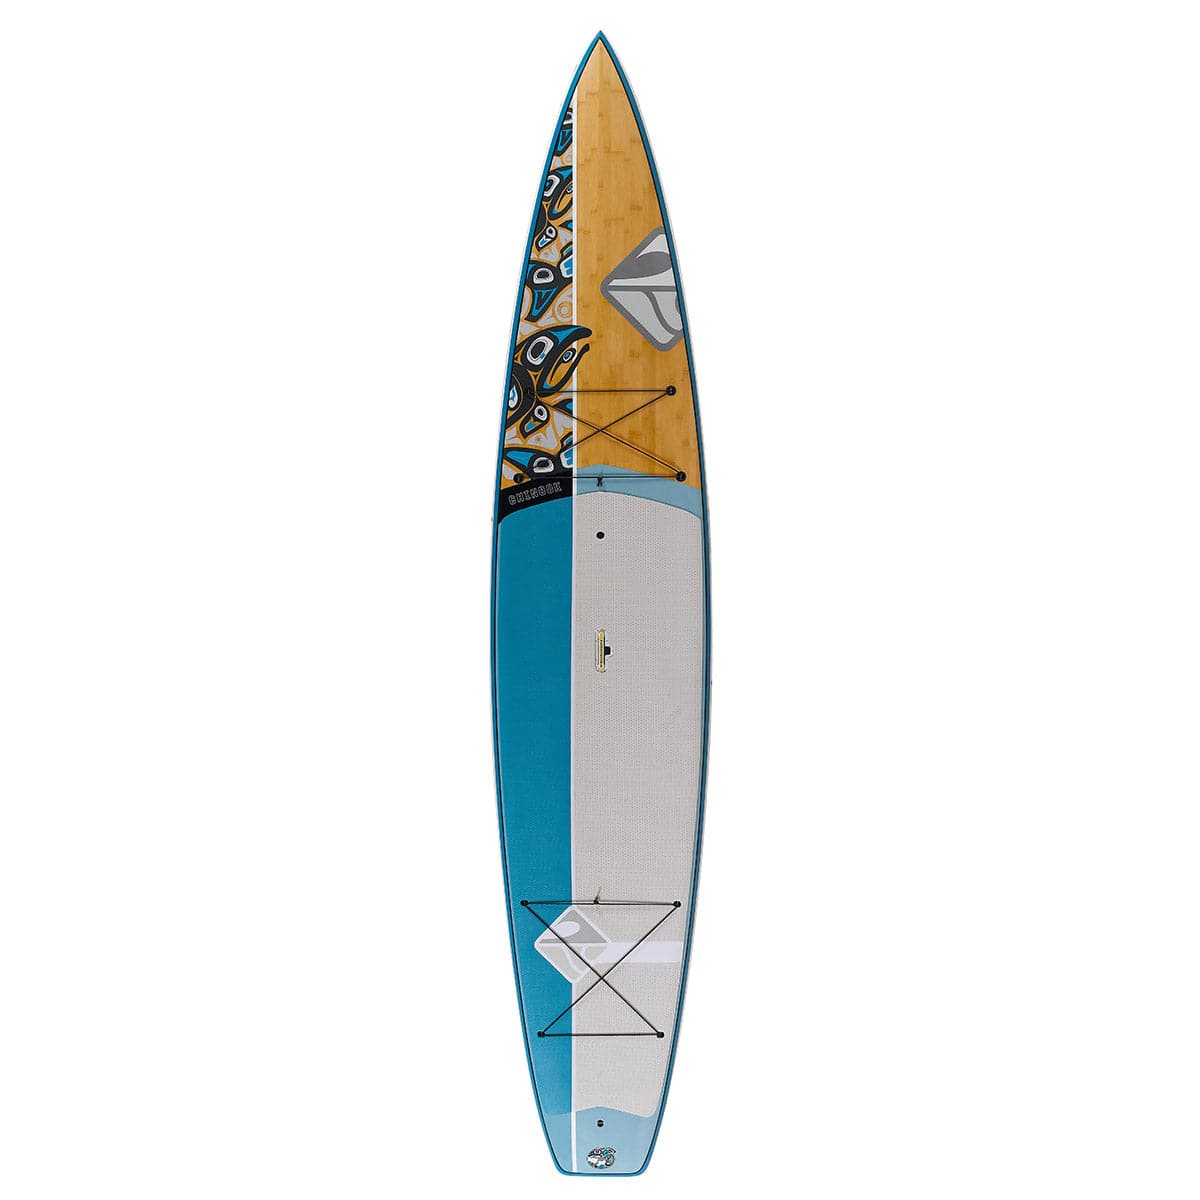 Featuring the Chinook 12'6 rigid sup manufactured by Boardworks shown here from one angle.